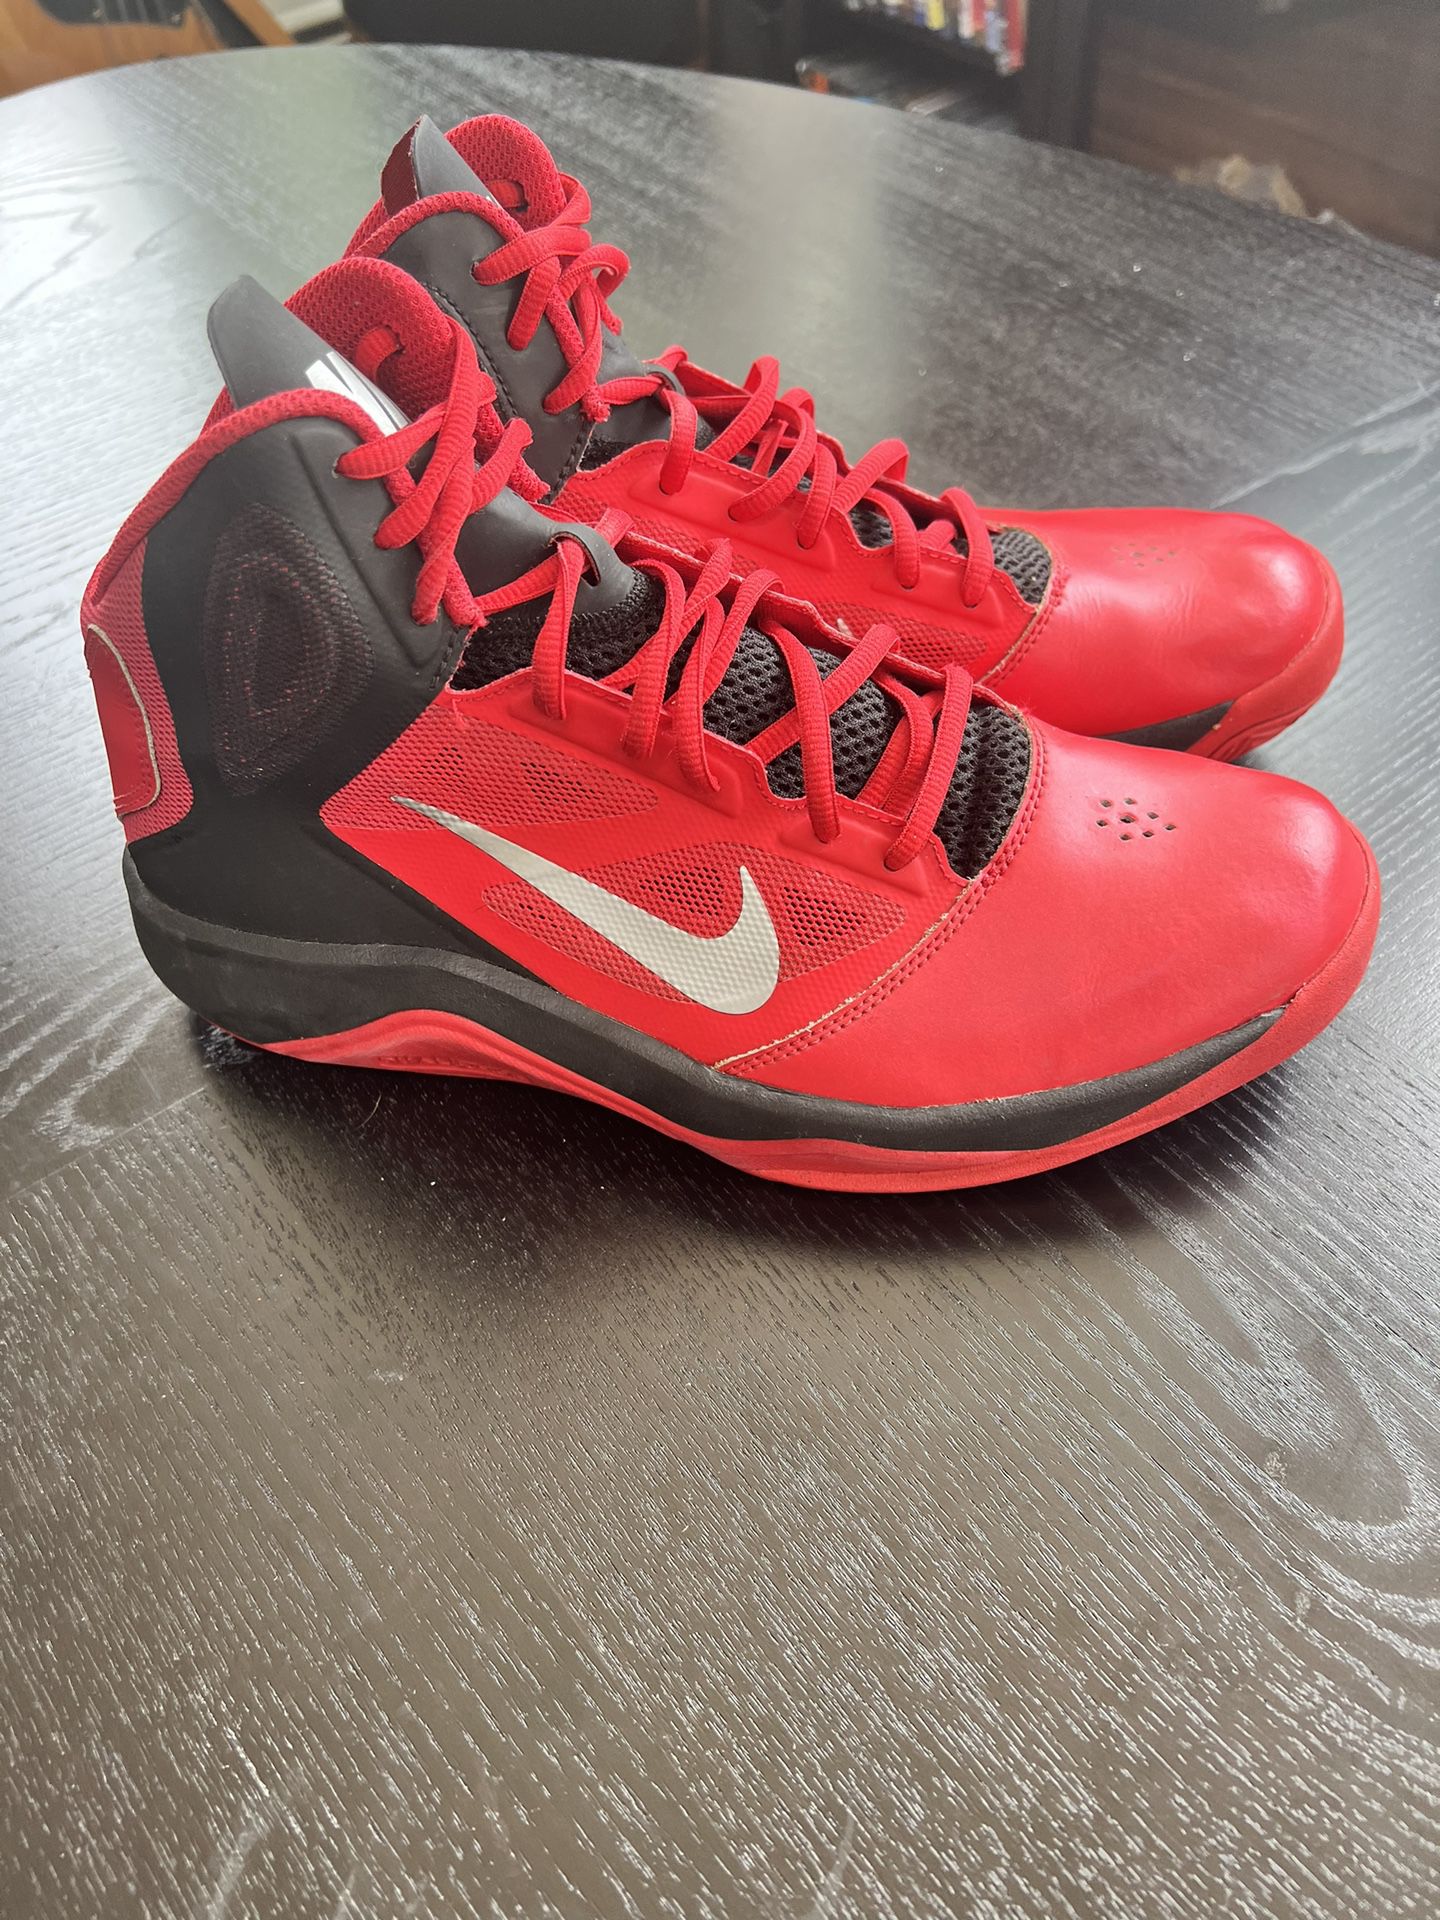 Positiv Wings indkomst Mens Size 8.5 Nike Dual Fusion Basketball Shoes for Sale in Lisbon, CT -  OfferUp